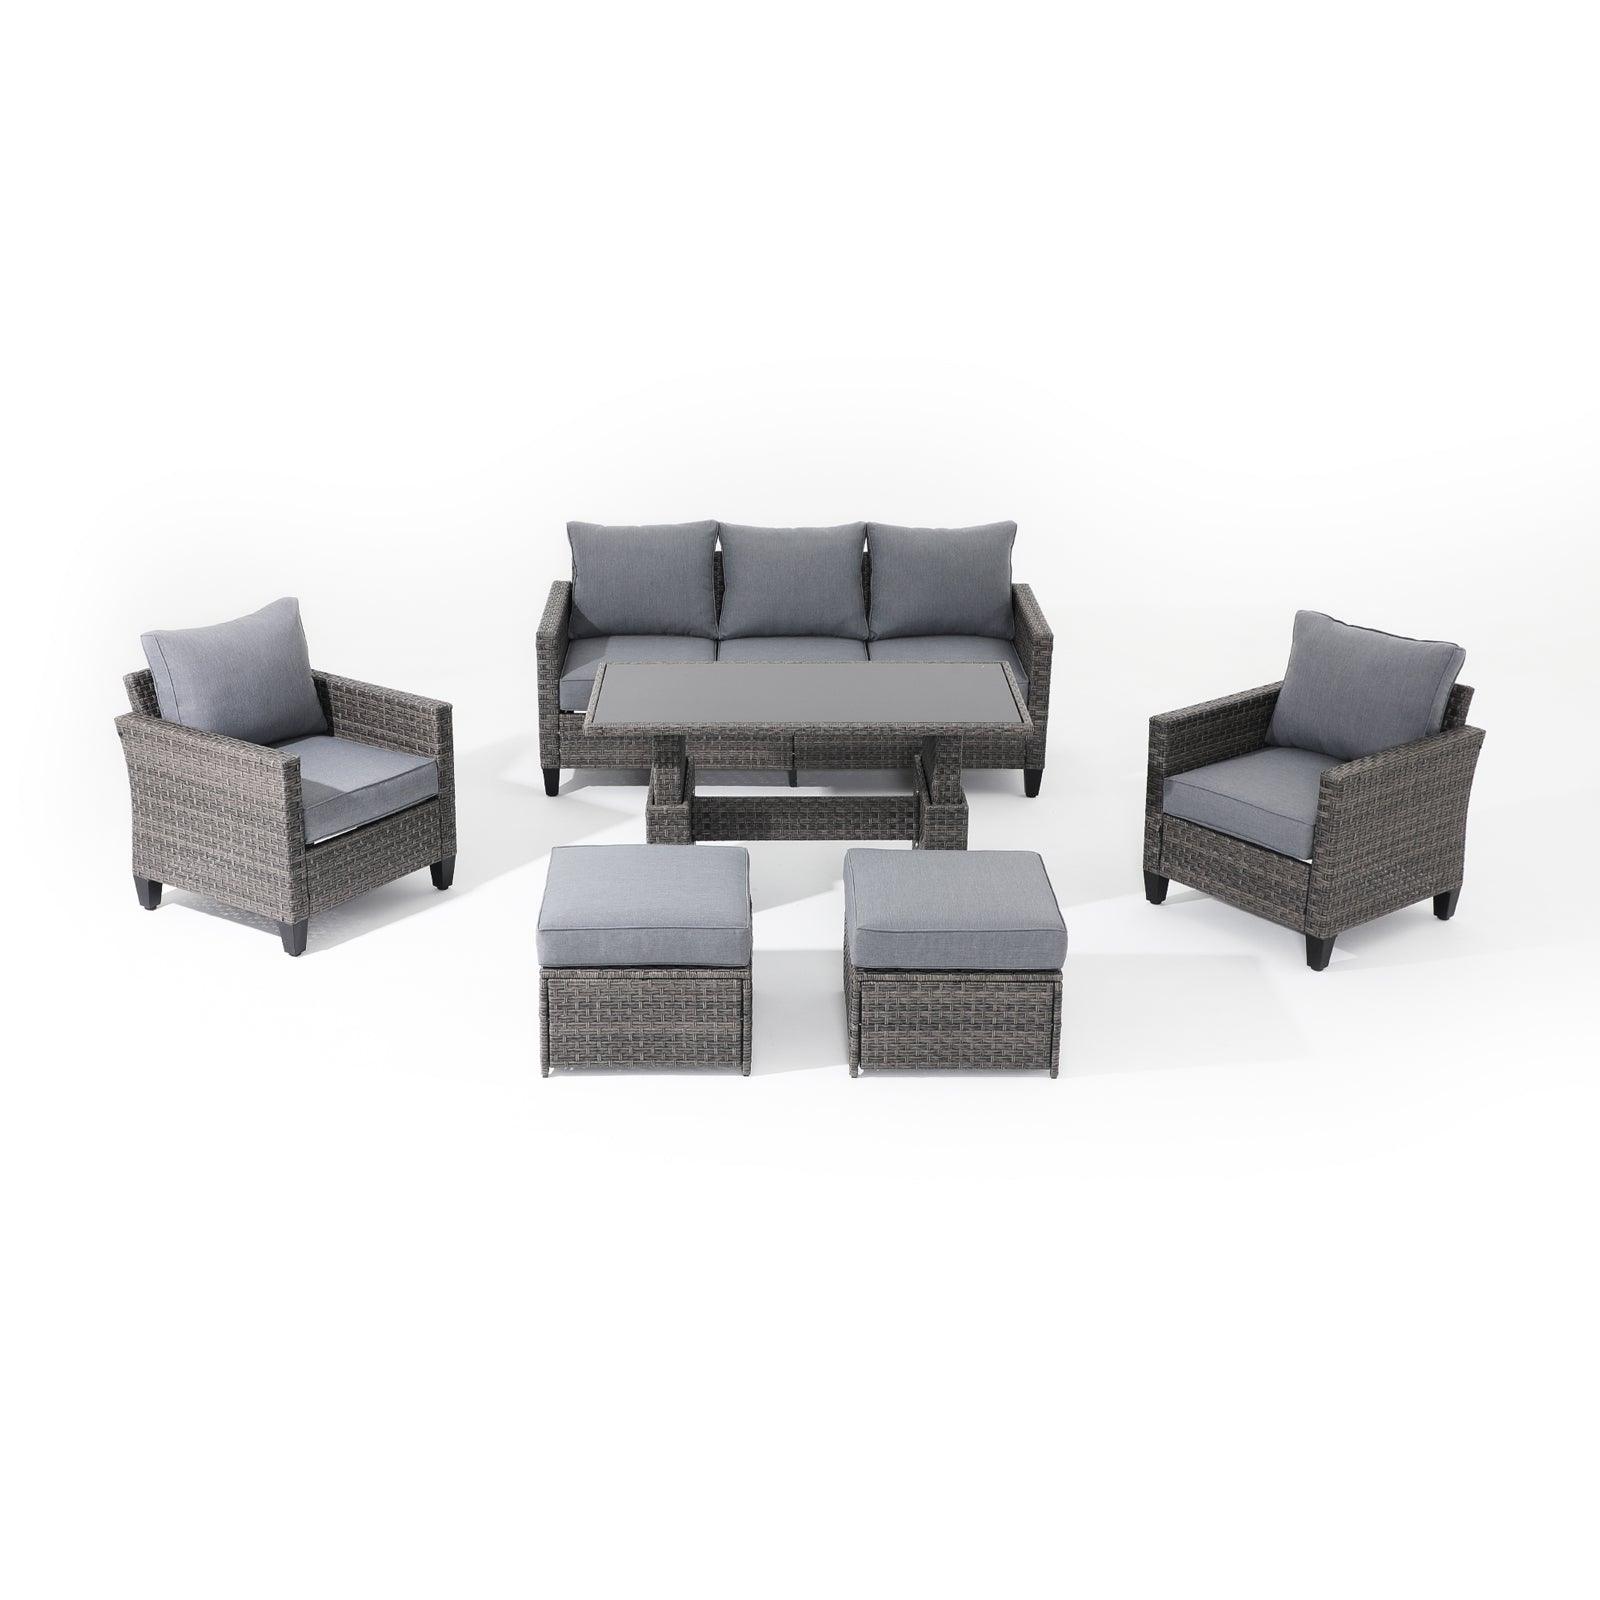 Ayia 6-Piece outdoor Sofa Set with Rattan design, Grey cushions, a 3-seater sofa, 2 arm chairs , 2 ottomans, 1 multifunctional outdoor table - Jardina Furniture #color_Grey#piece_6-pc. with ottomans & Table